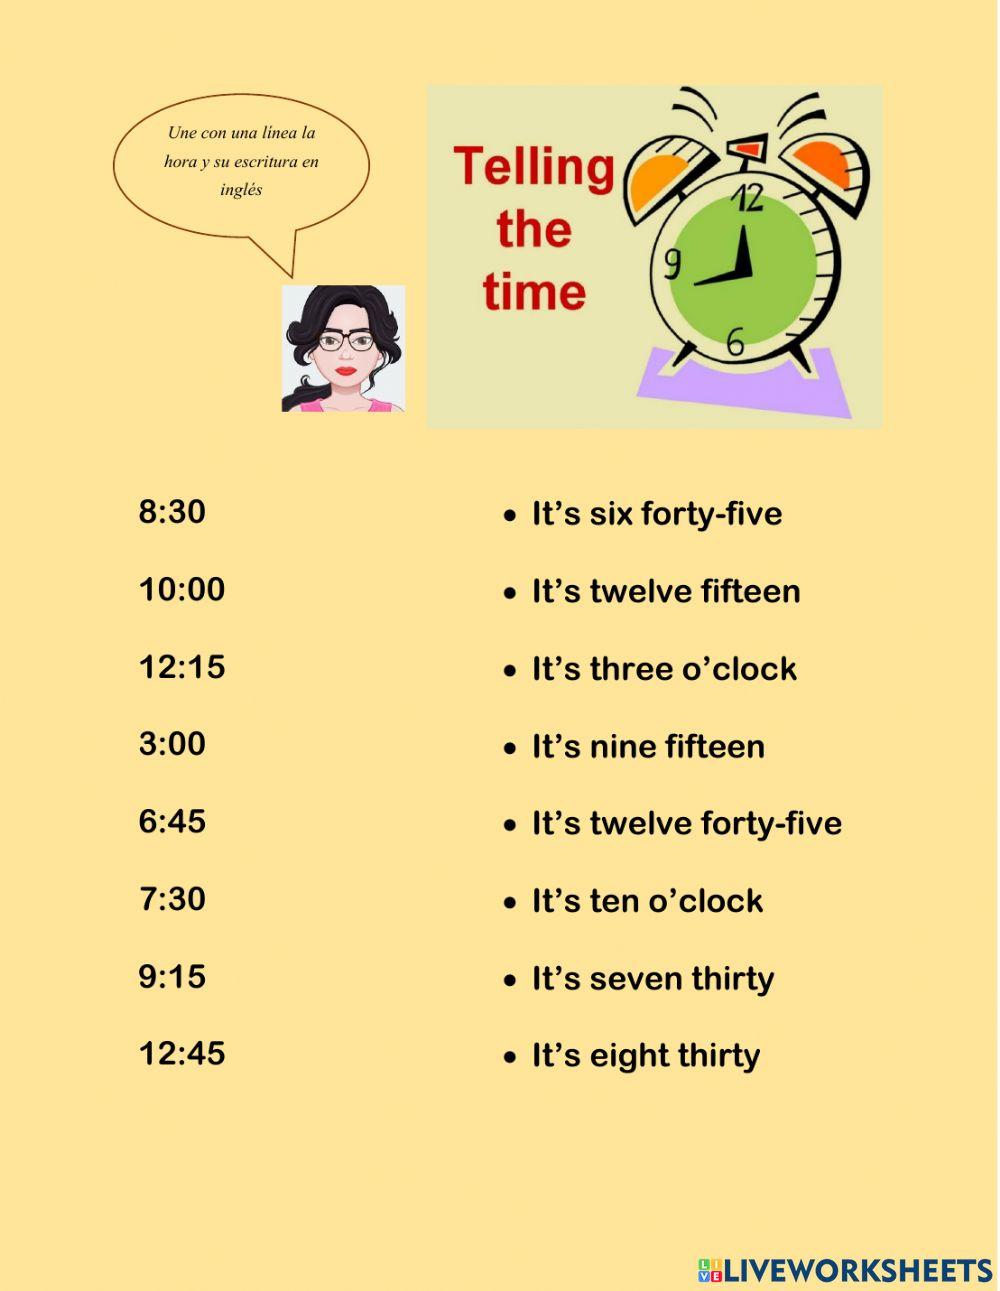 Telling the time (Informal)